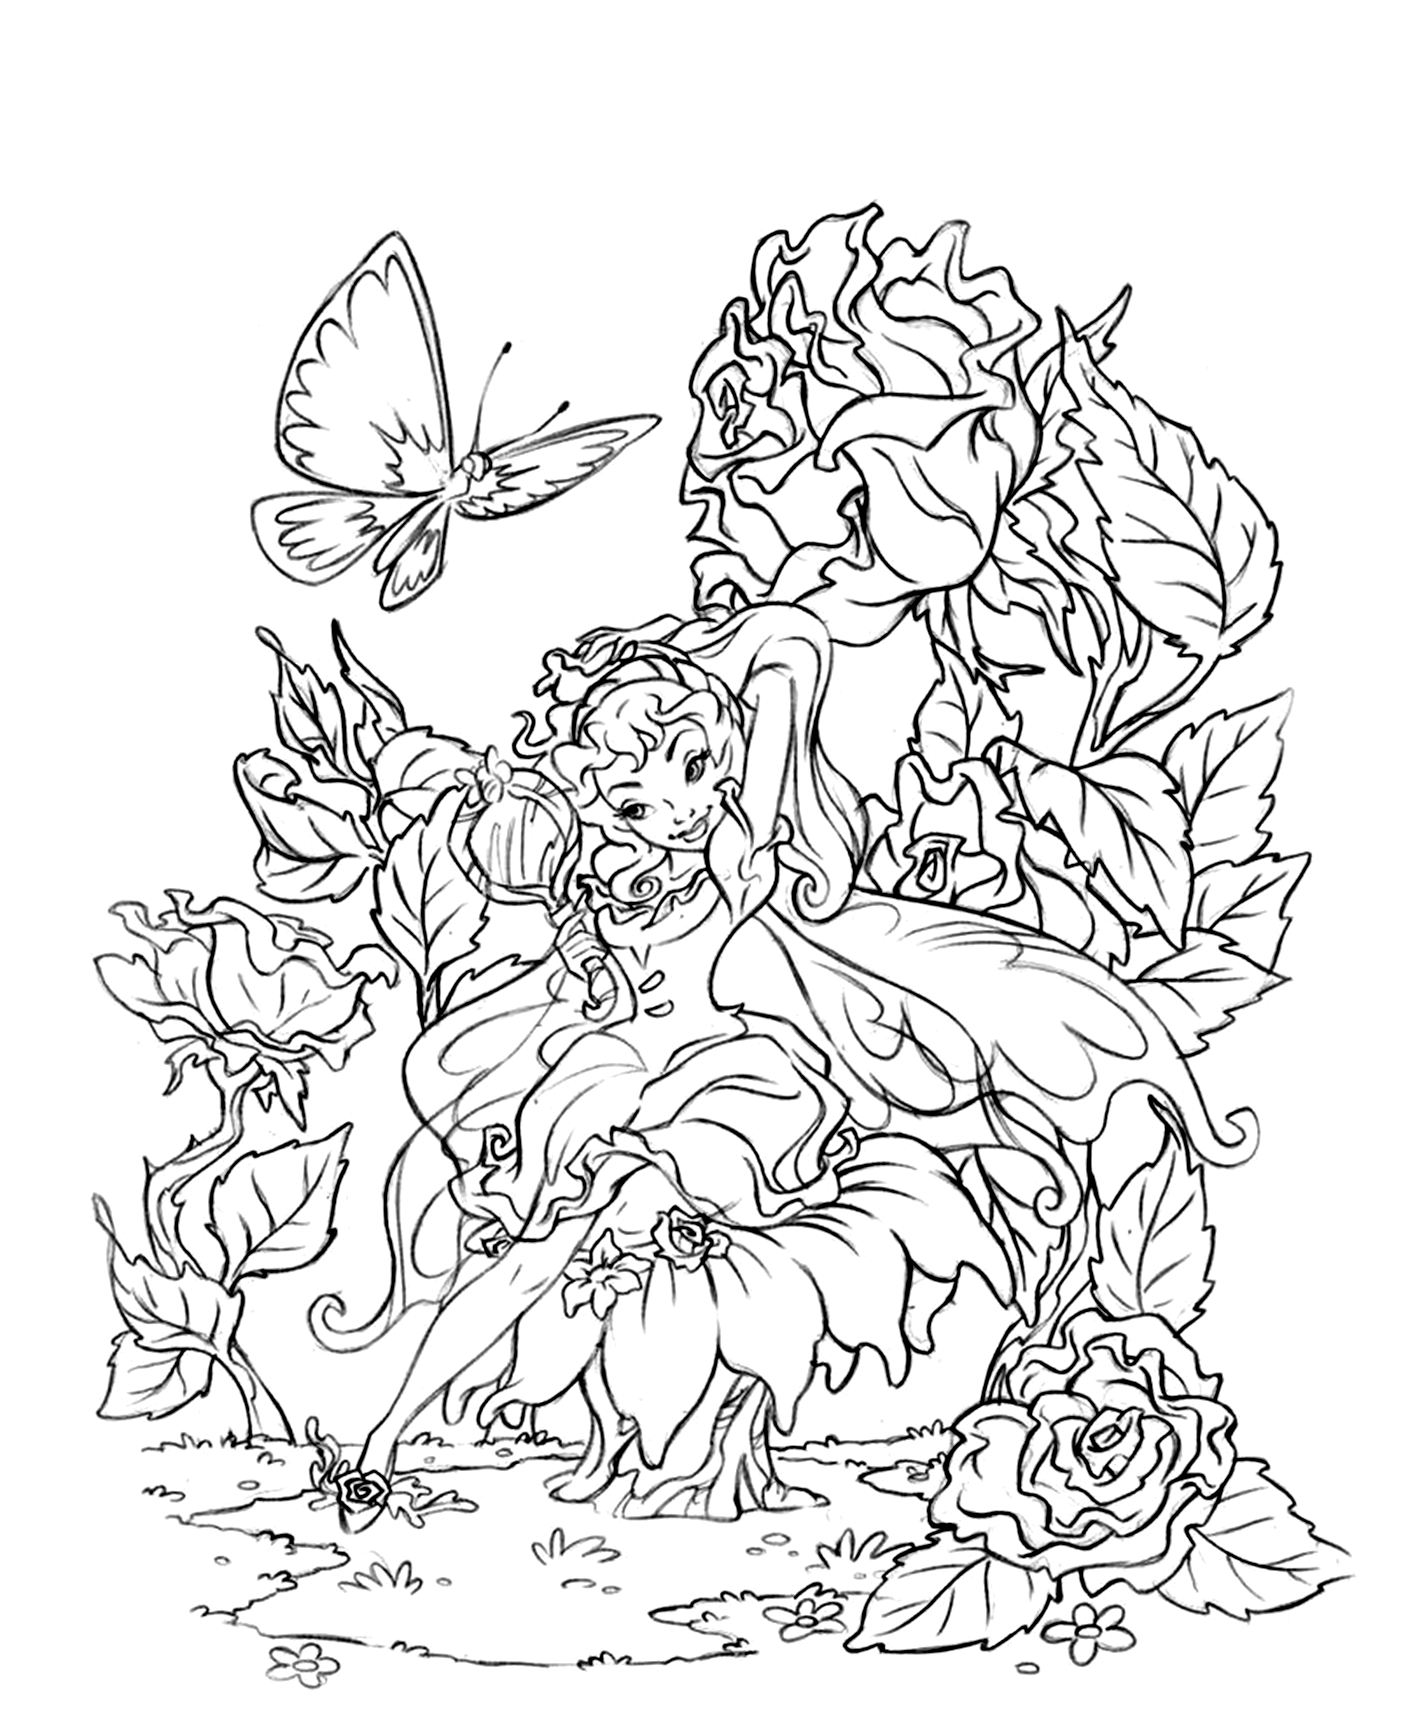 Coloring pages for adults, fairy coloring